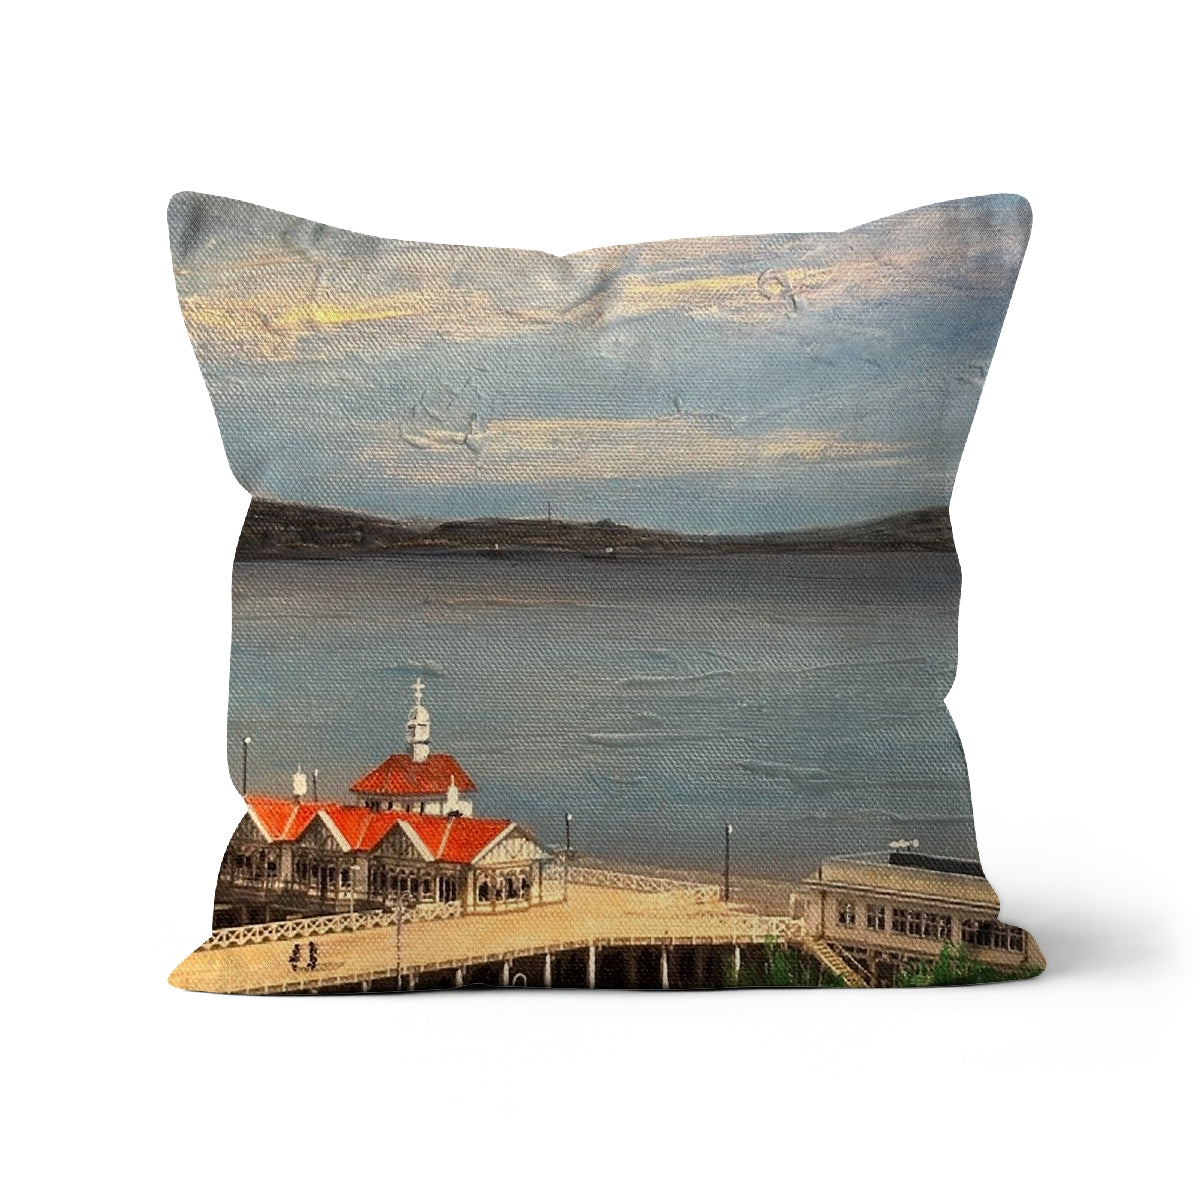 Looking From Dunoon Art Gifts Cushion-Cushions-River Clyde Art Gallery-Faux Suede-16"x16"-Paintings, Prints, Homeware, Art Gifts From Scotland By Scottish Artist Kevin Hunter